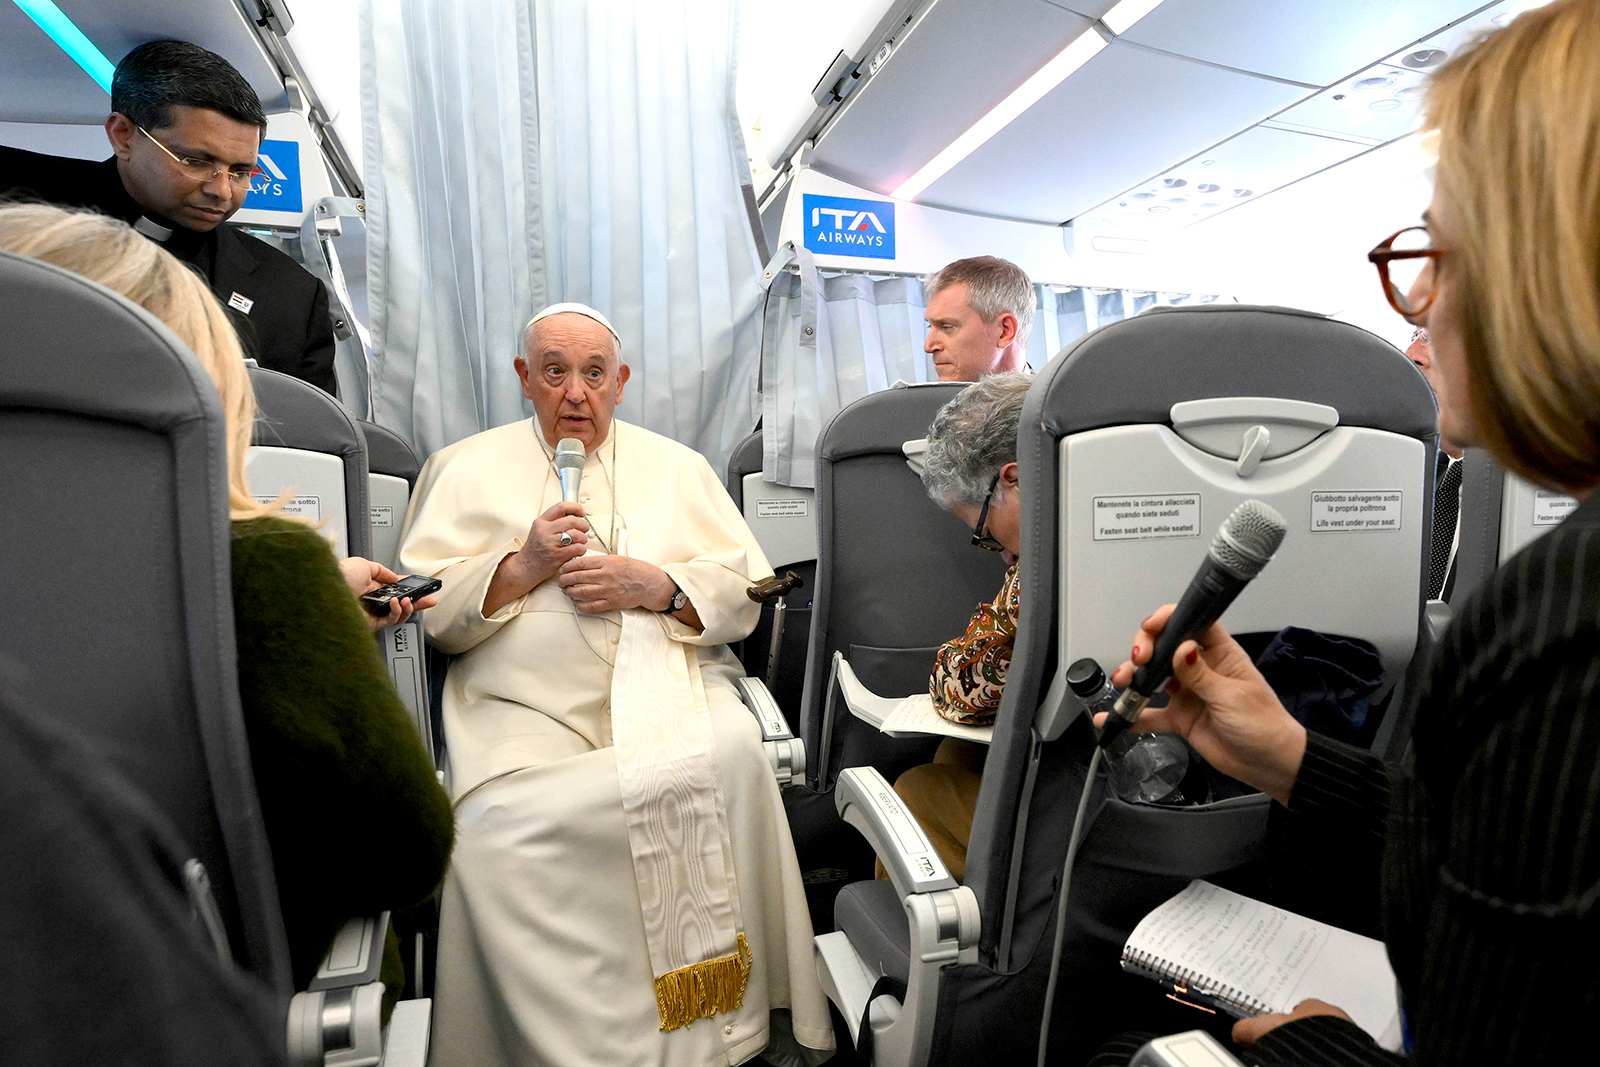 Pope Francis speaks to journalists traveling with him on the return flight to Rome from his Apostolic Journey to Hungary in Budapest on April 30.